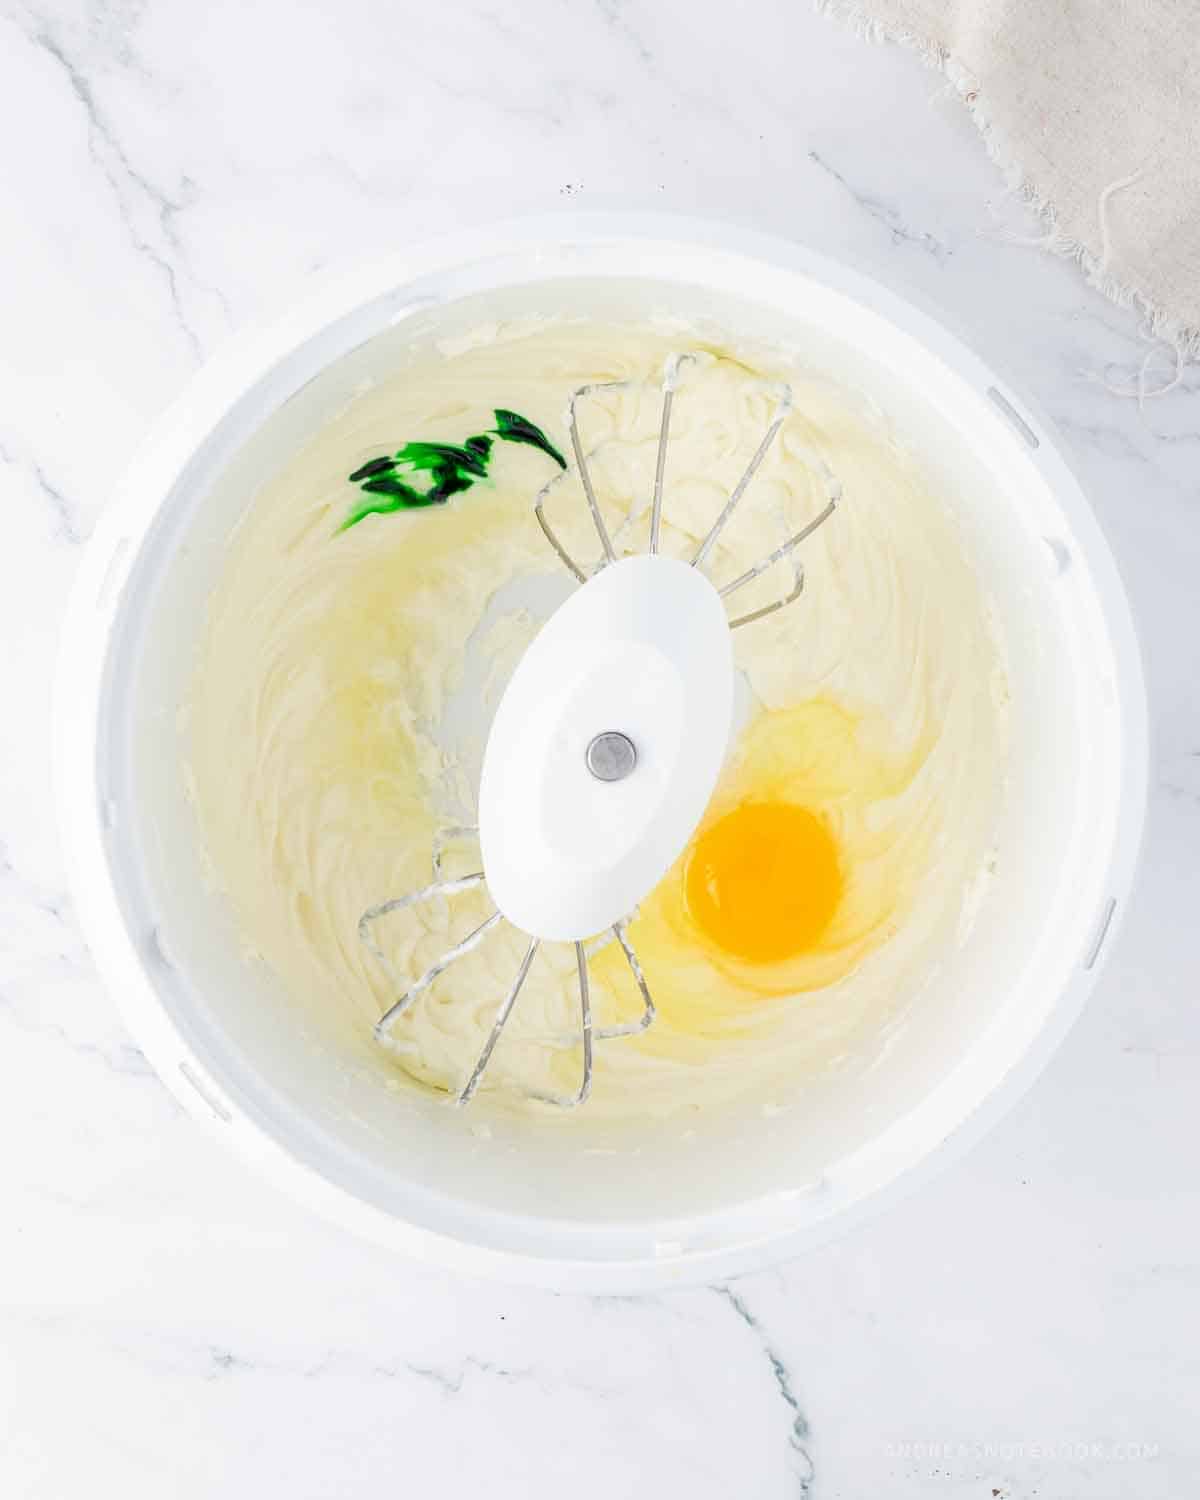 Green food coloring and egg added to cream cheese and sugar in the mixing bowl.